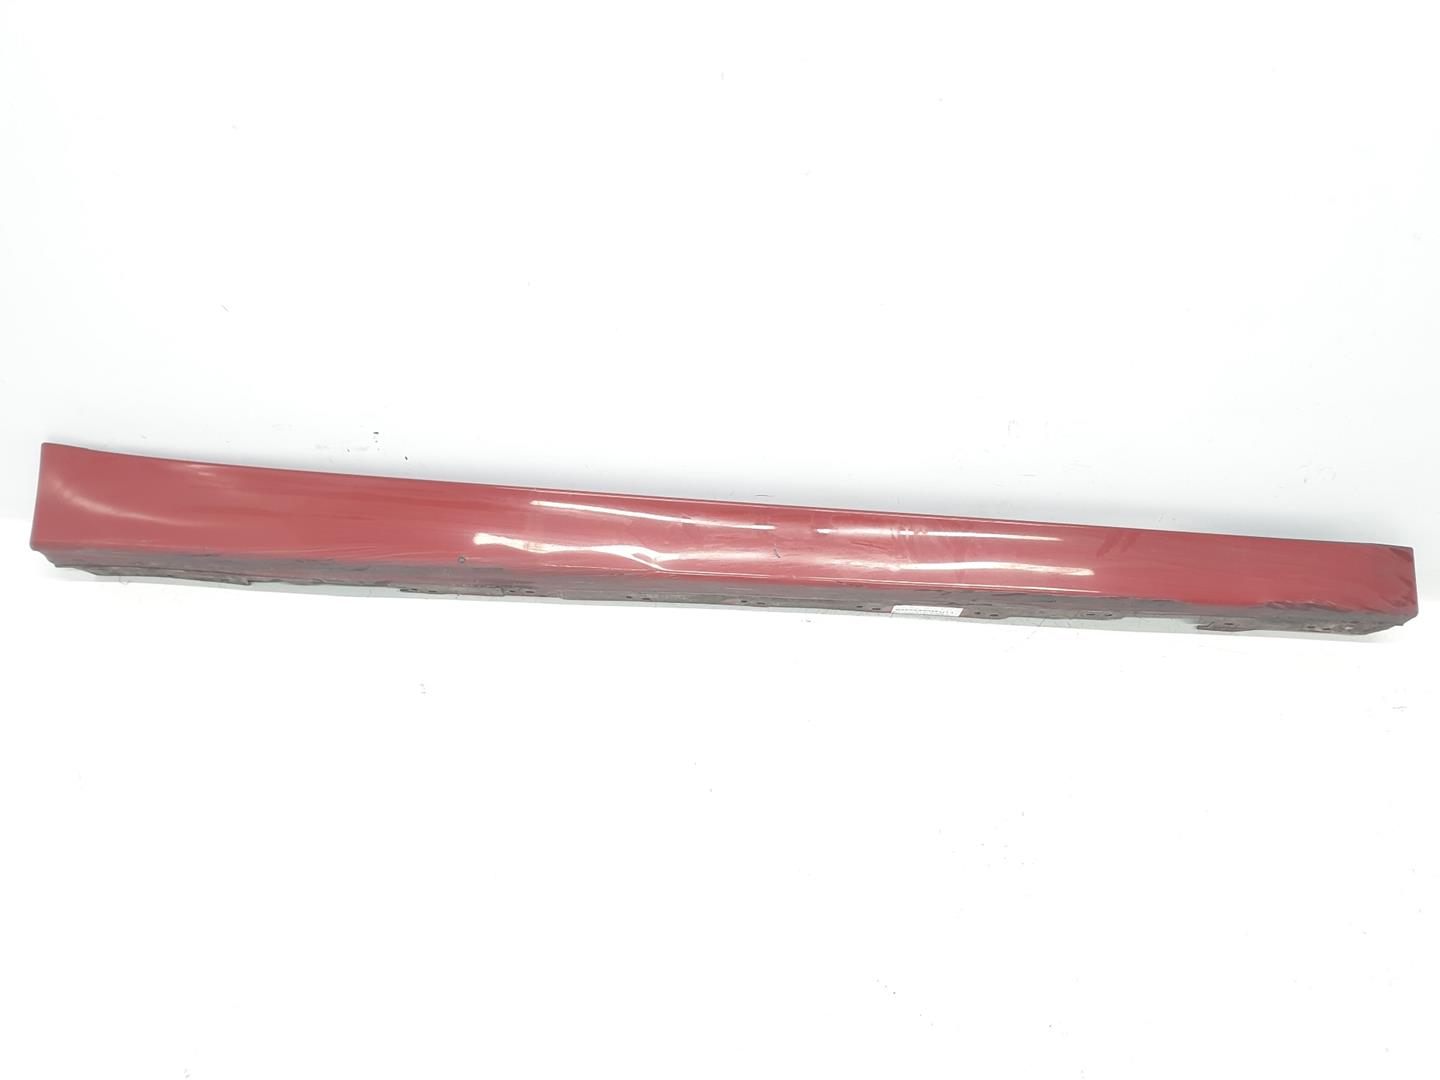 BMW 3 Series F30/F31 (2011-2020) Other Body Parts 903145753, 51777312752, COLORROJOMETALICOA75 23536171